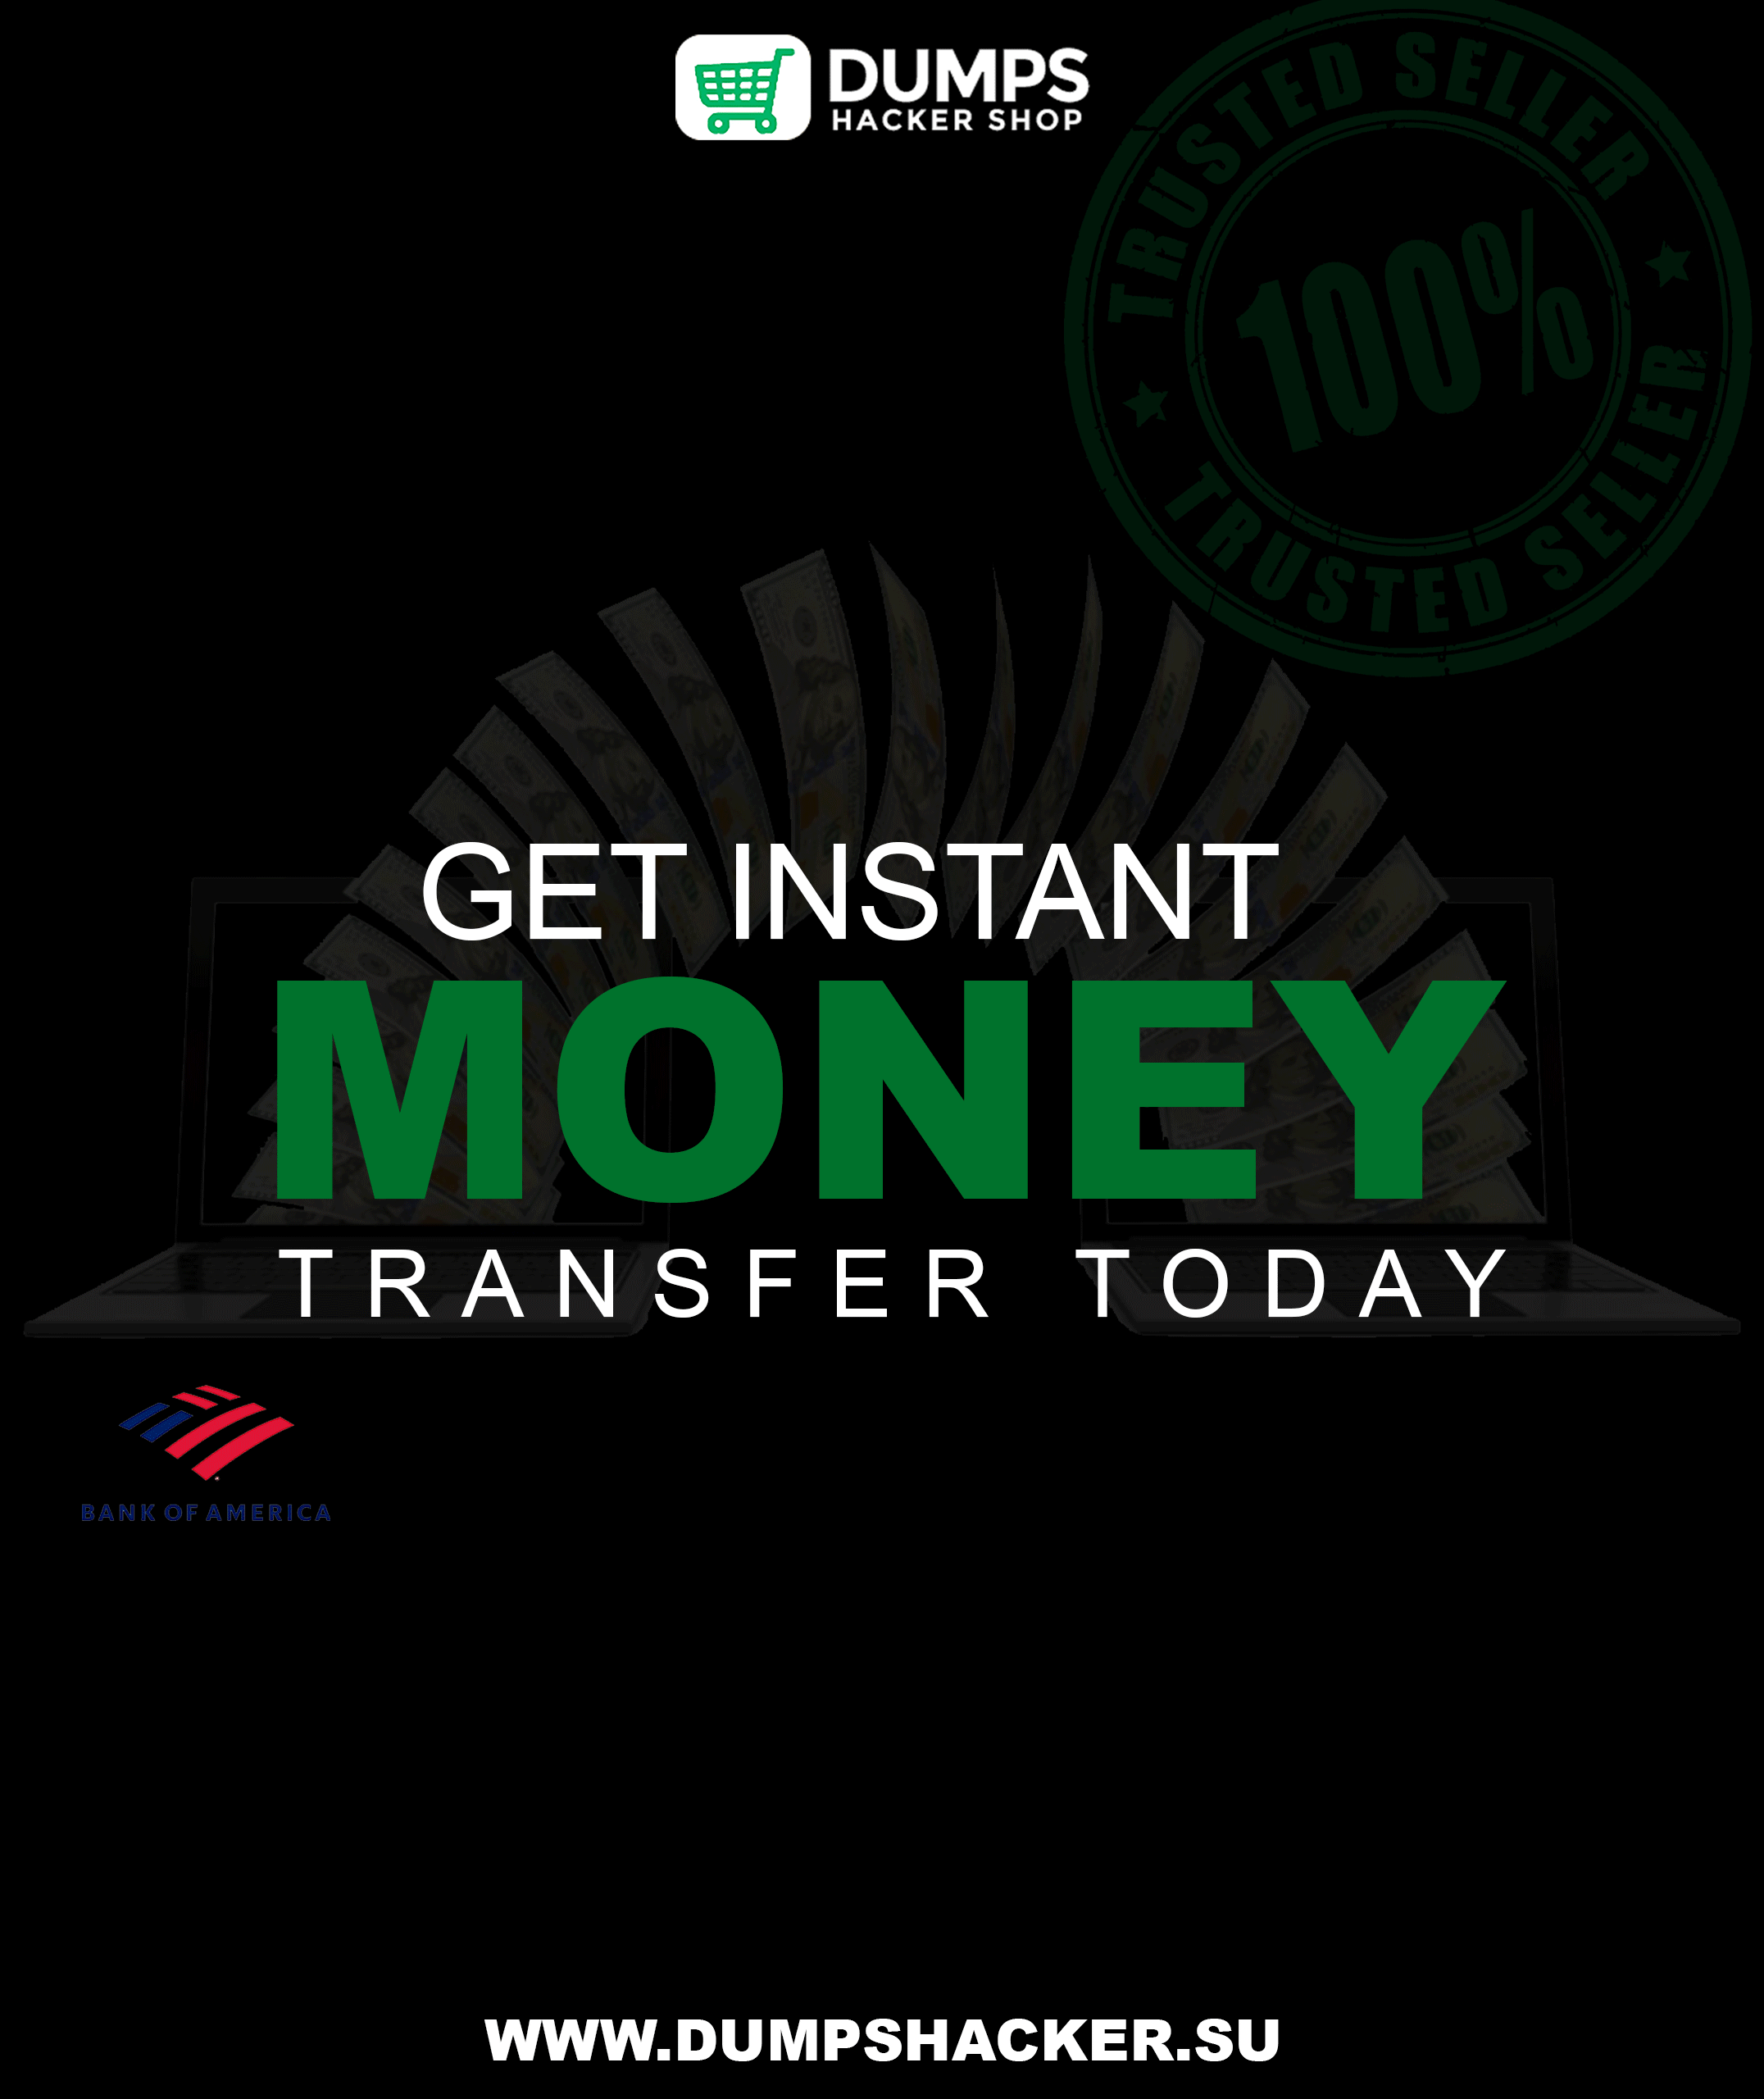 Get instant money transfer today